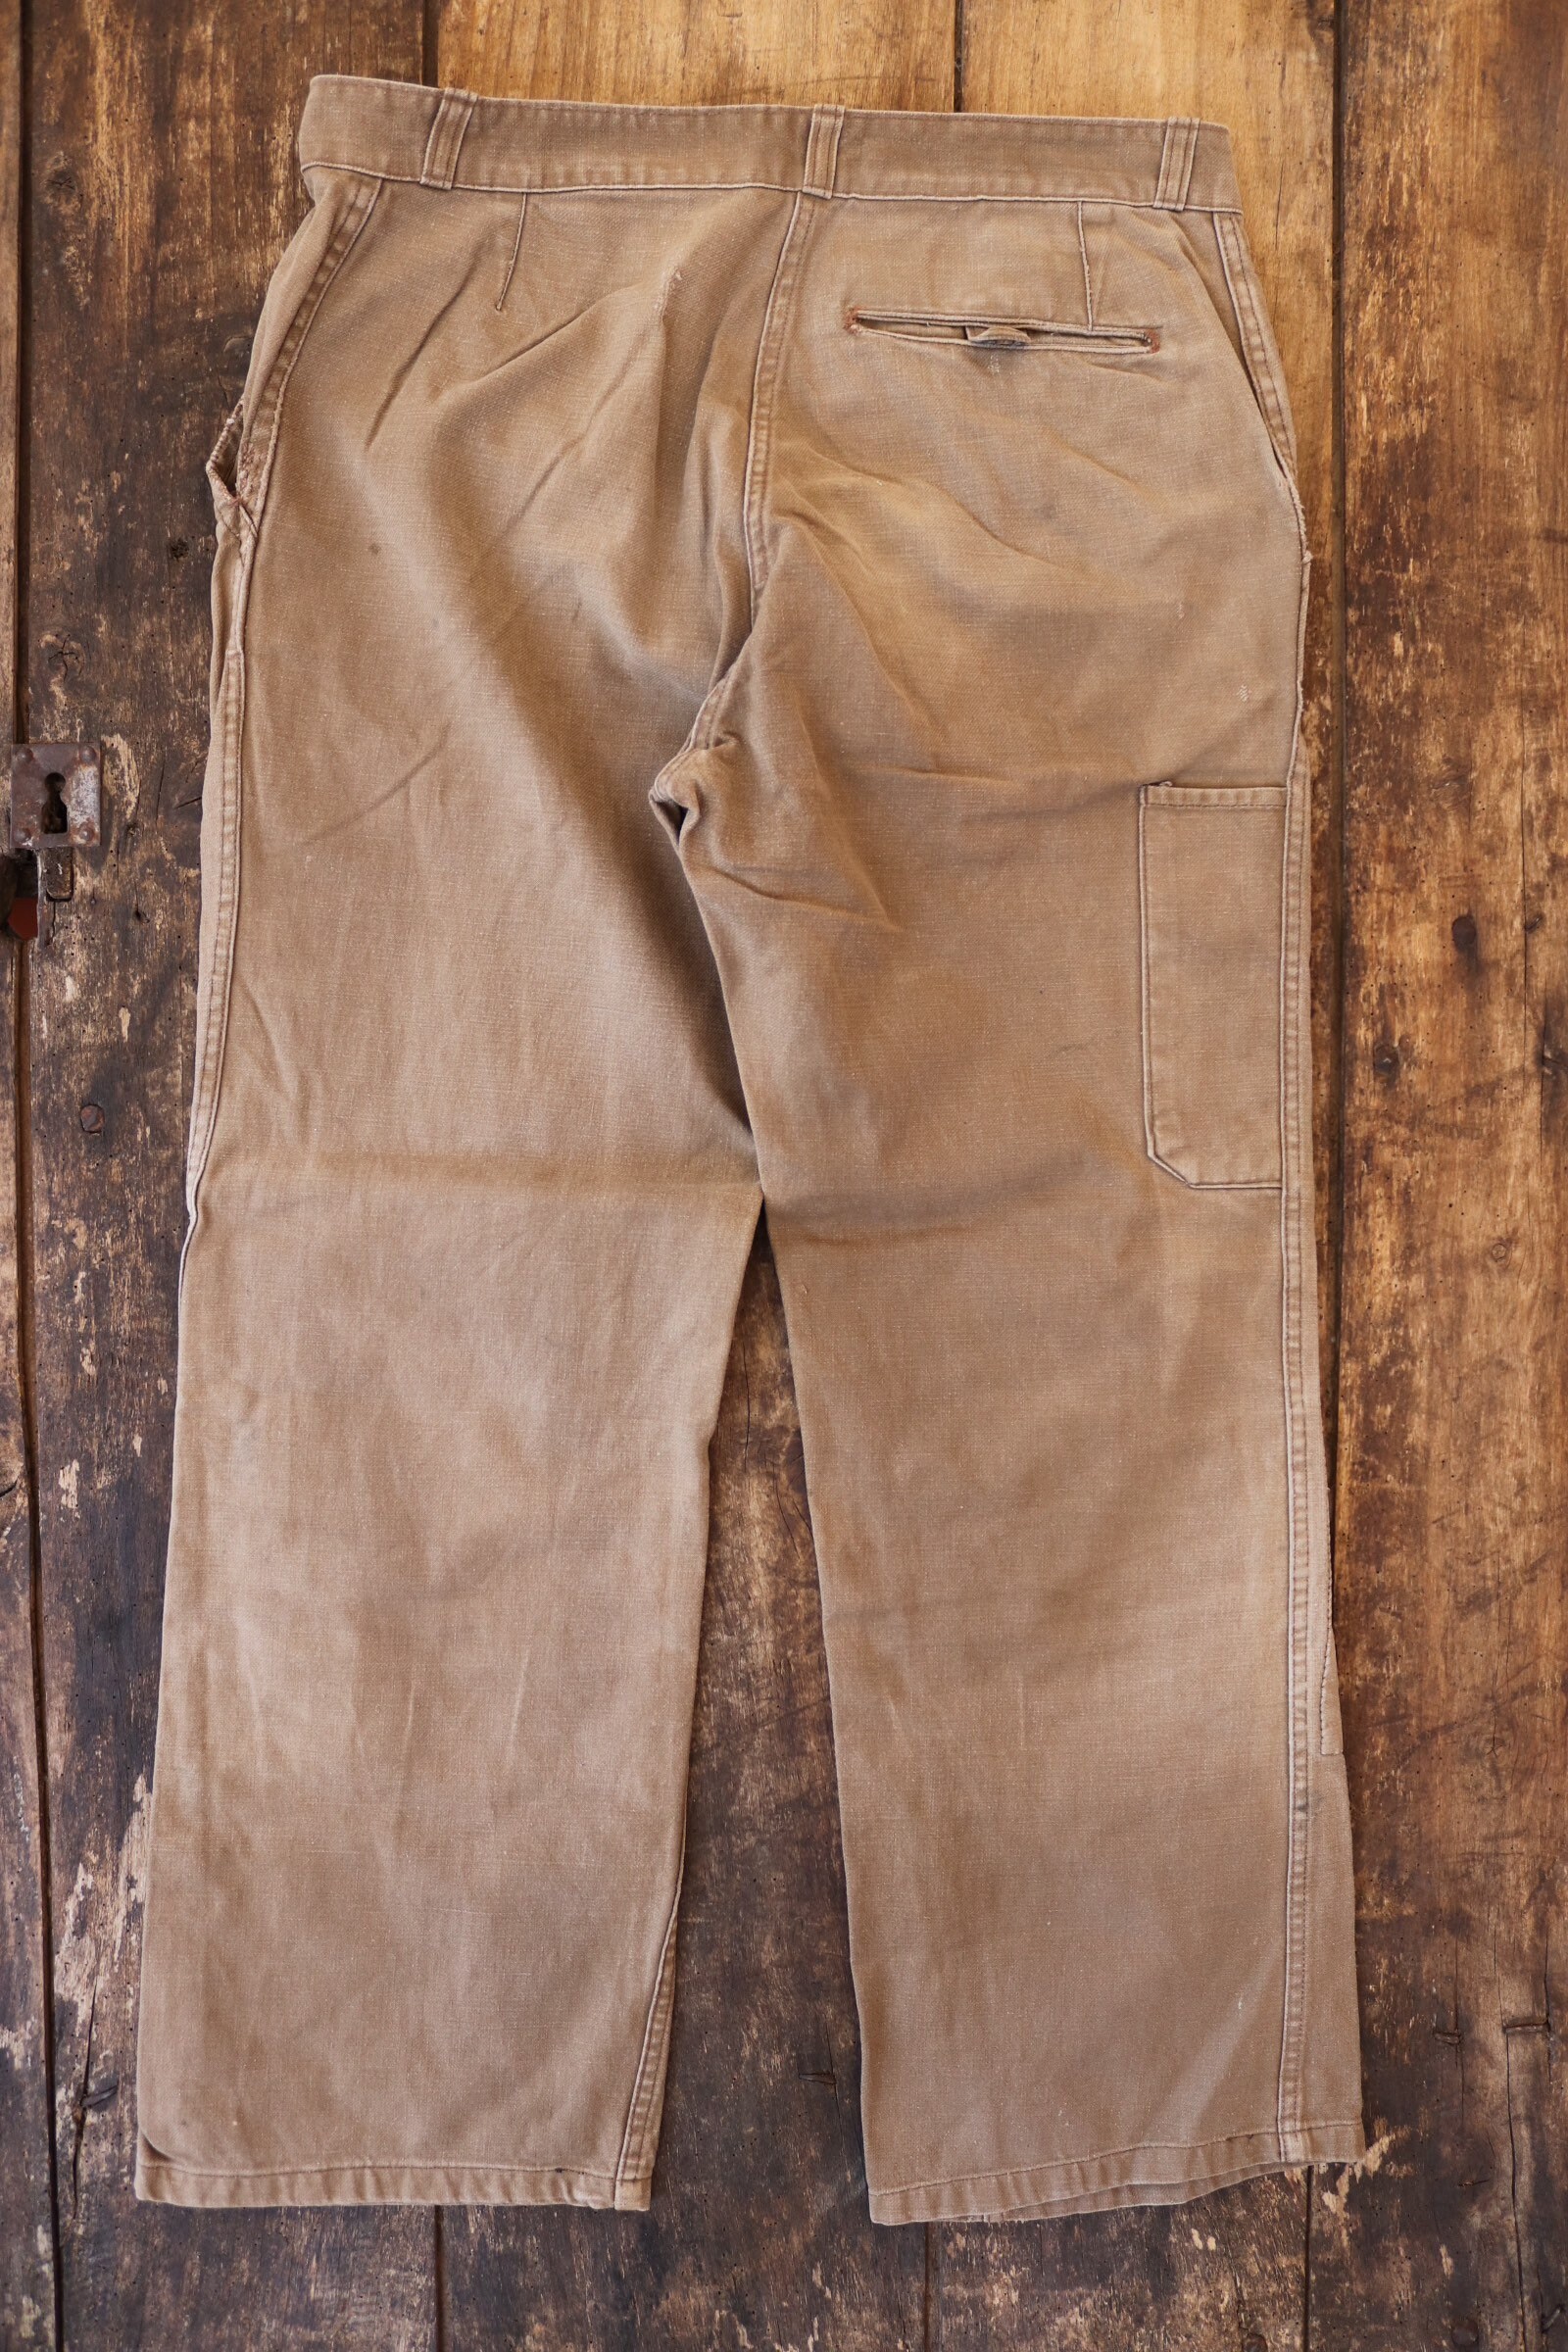 Vintage 1960s 60s tan brown french cotton canvas denim hunting work ...